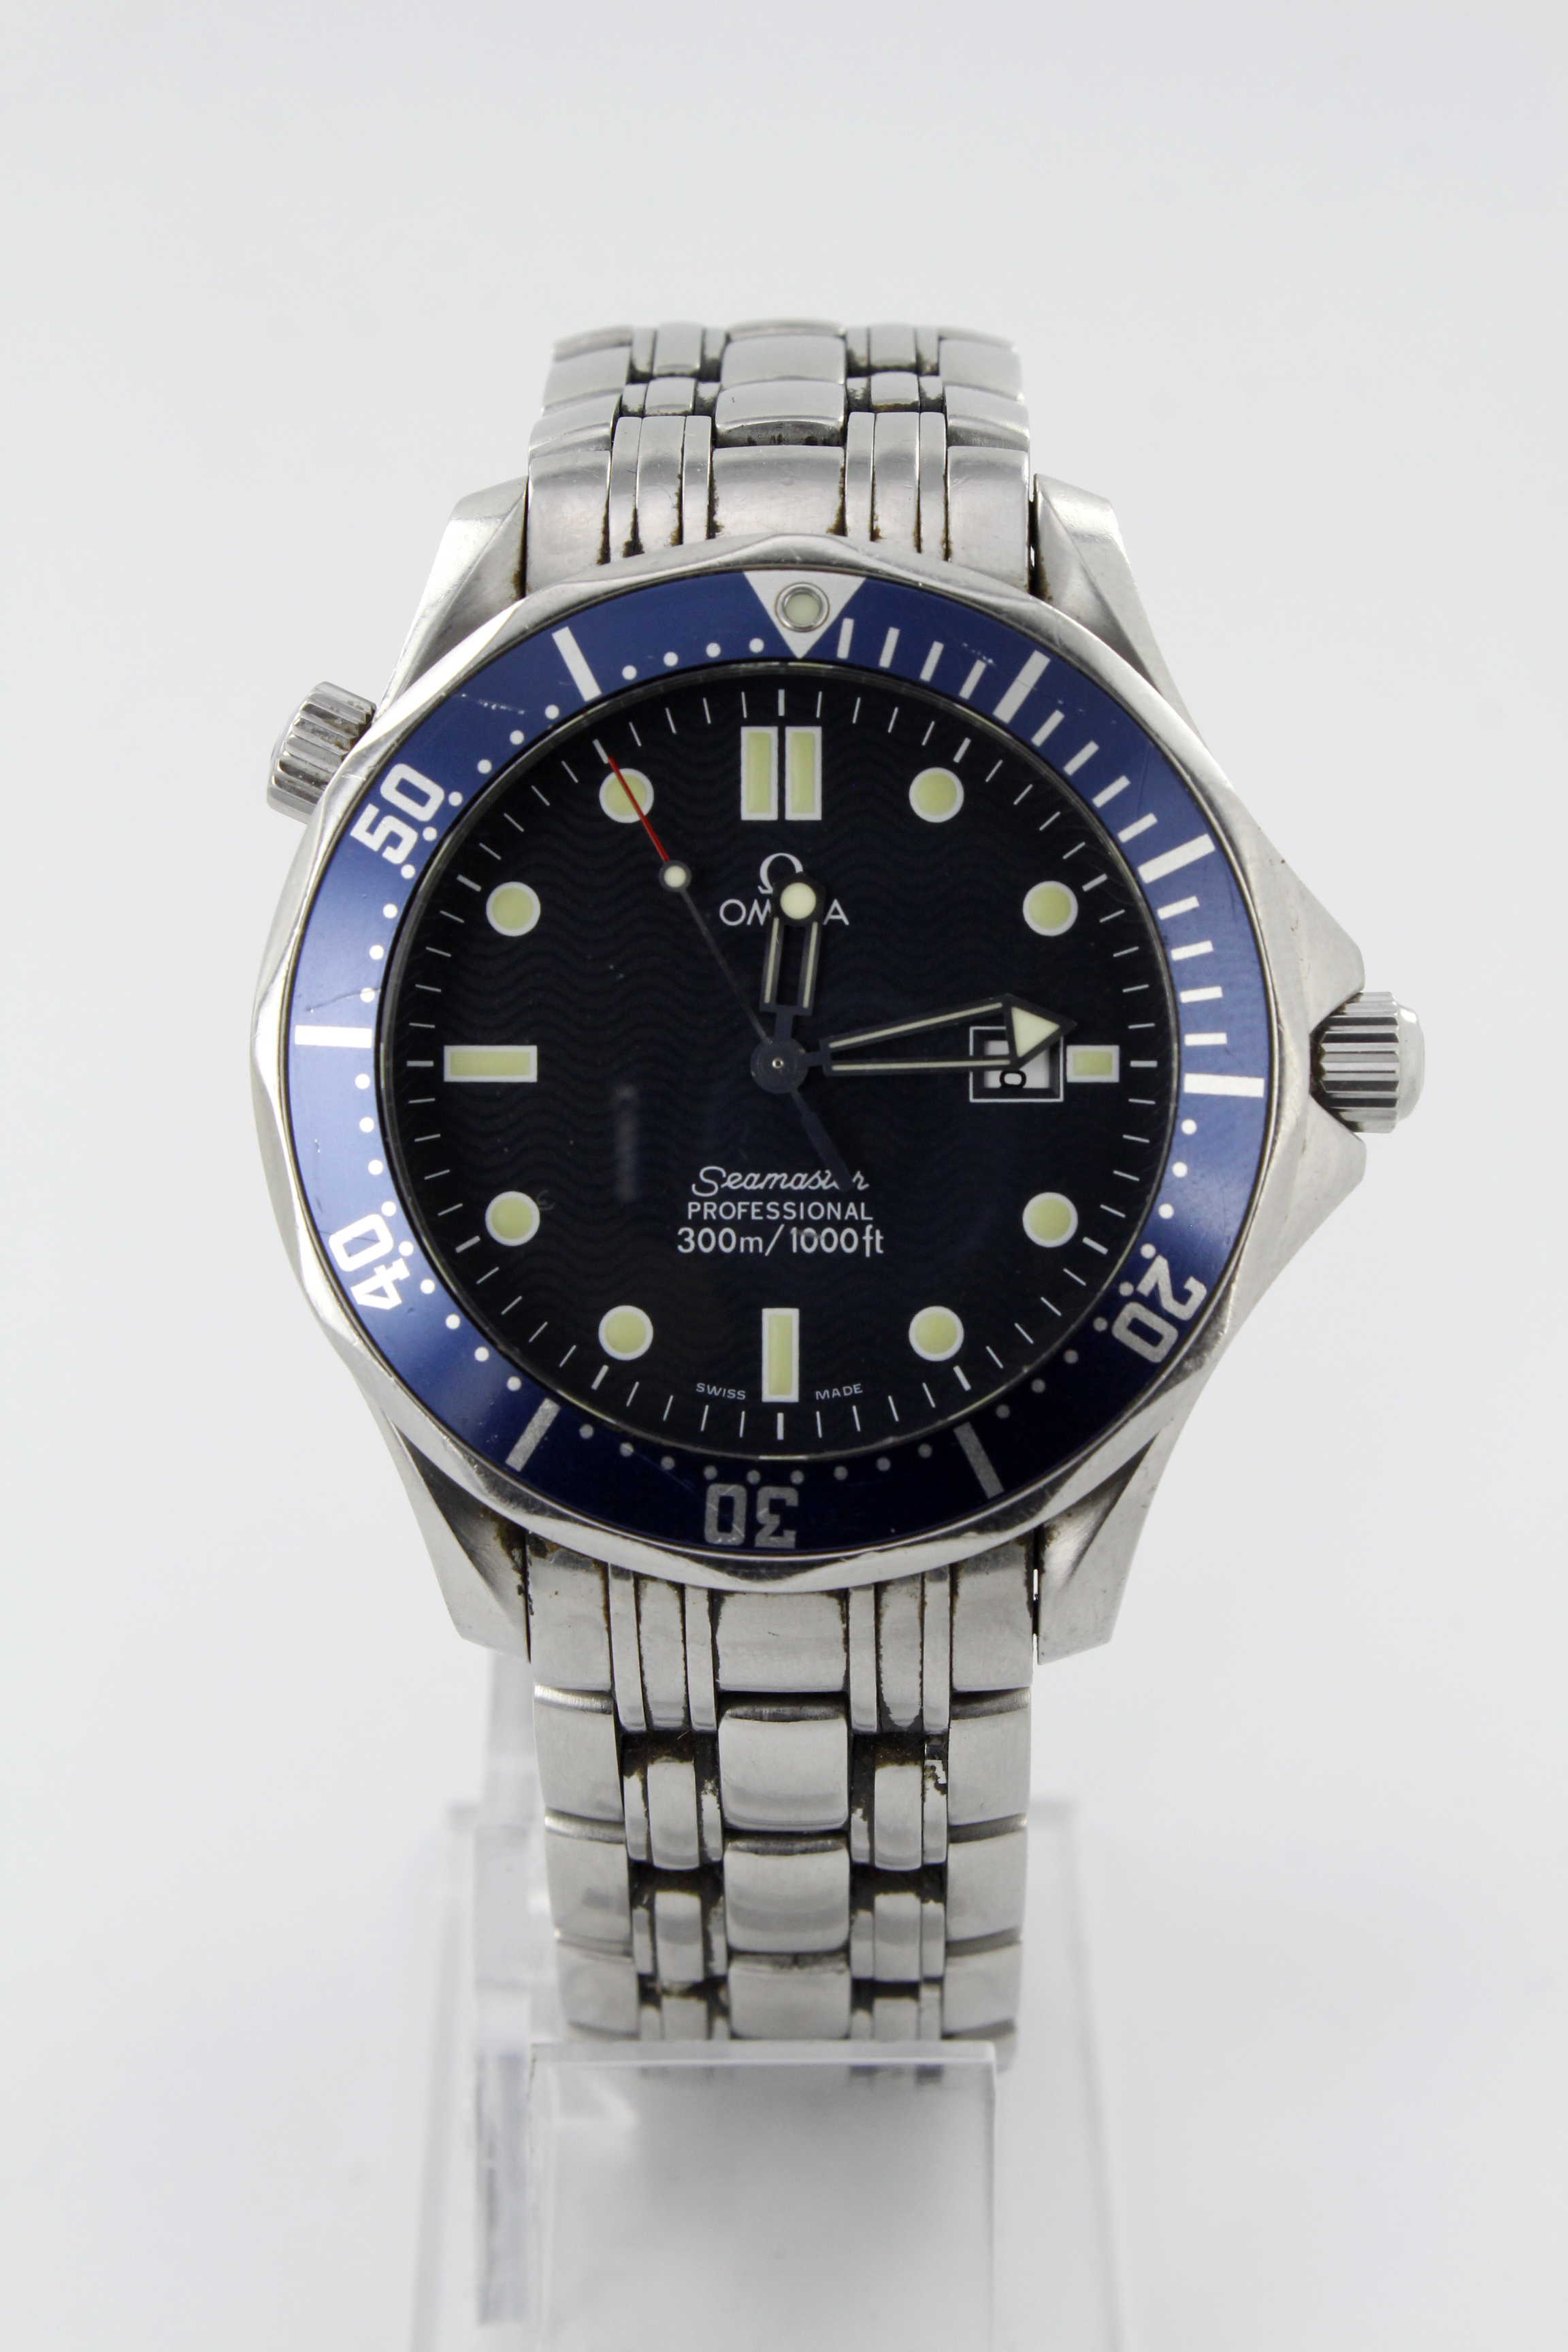 Omega Seamaster Professional 300m stainless steel cased gents automatic wristwatch, ref. 25418000,